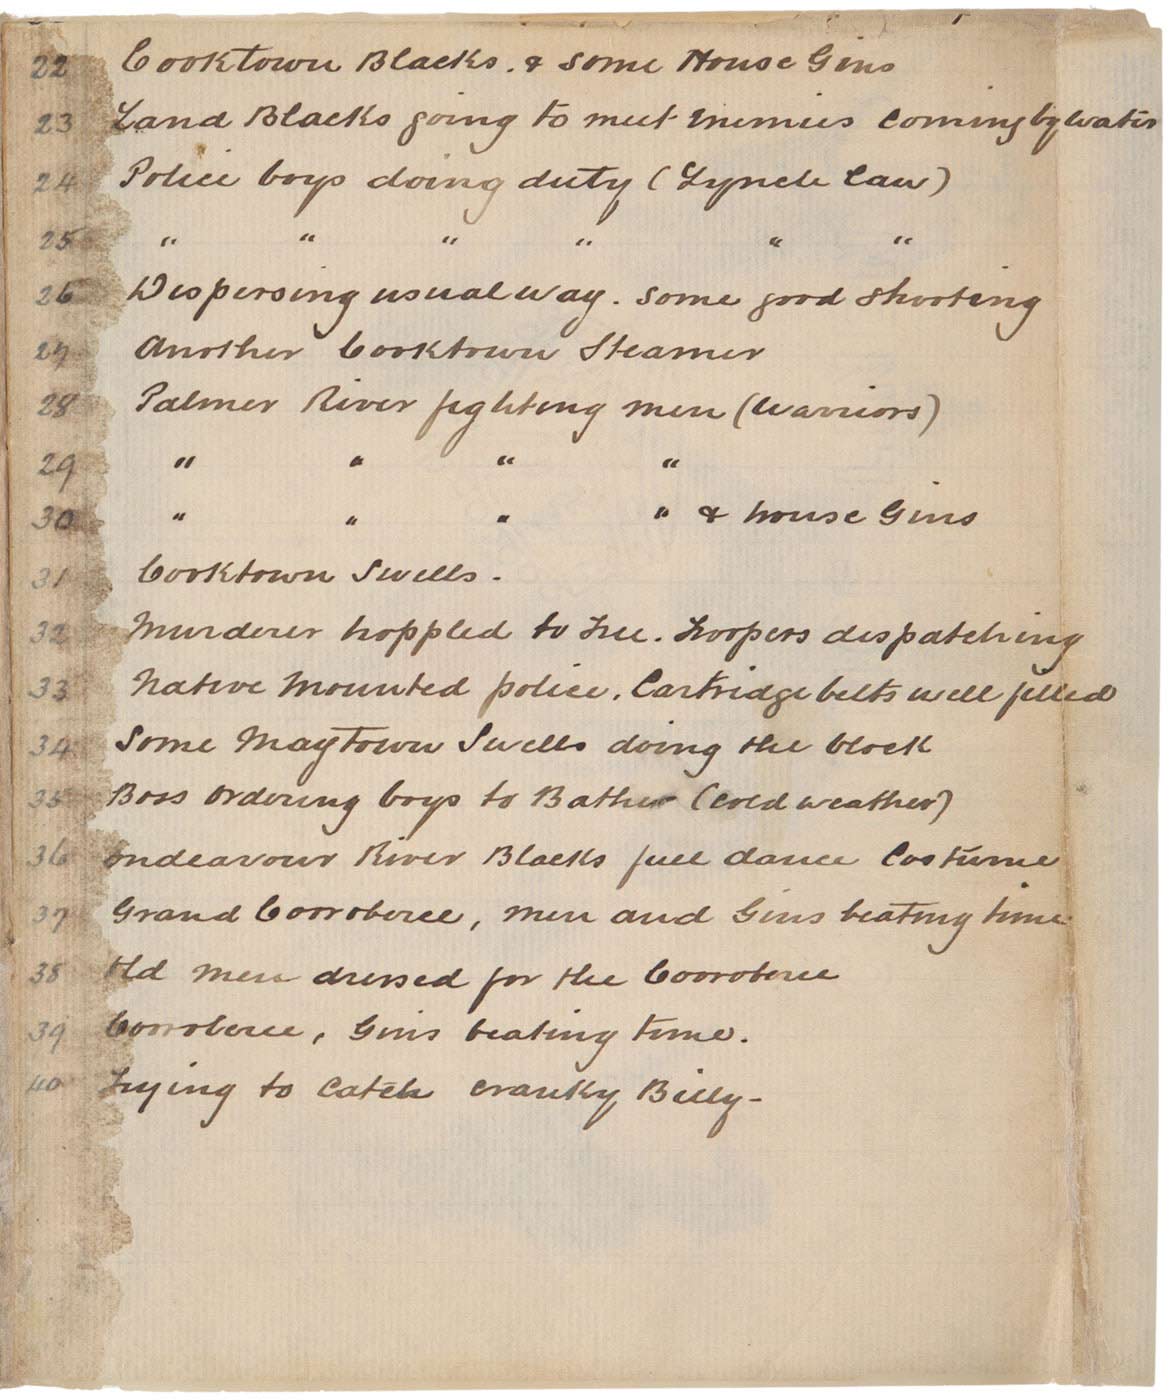 The second handwritten contents page of a sketchbook  - click to view larger image